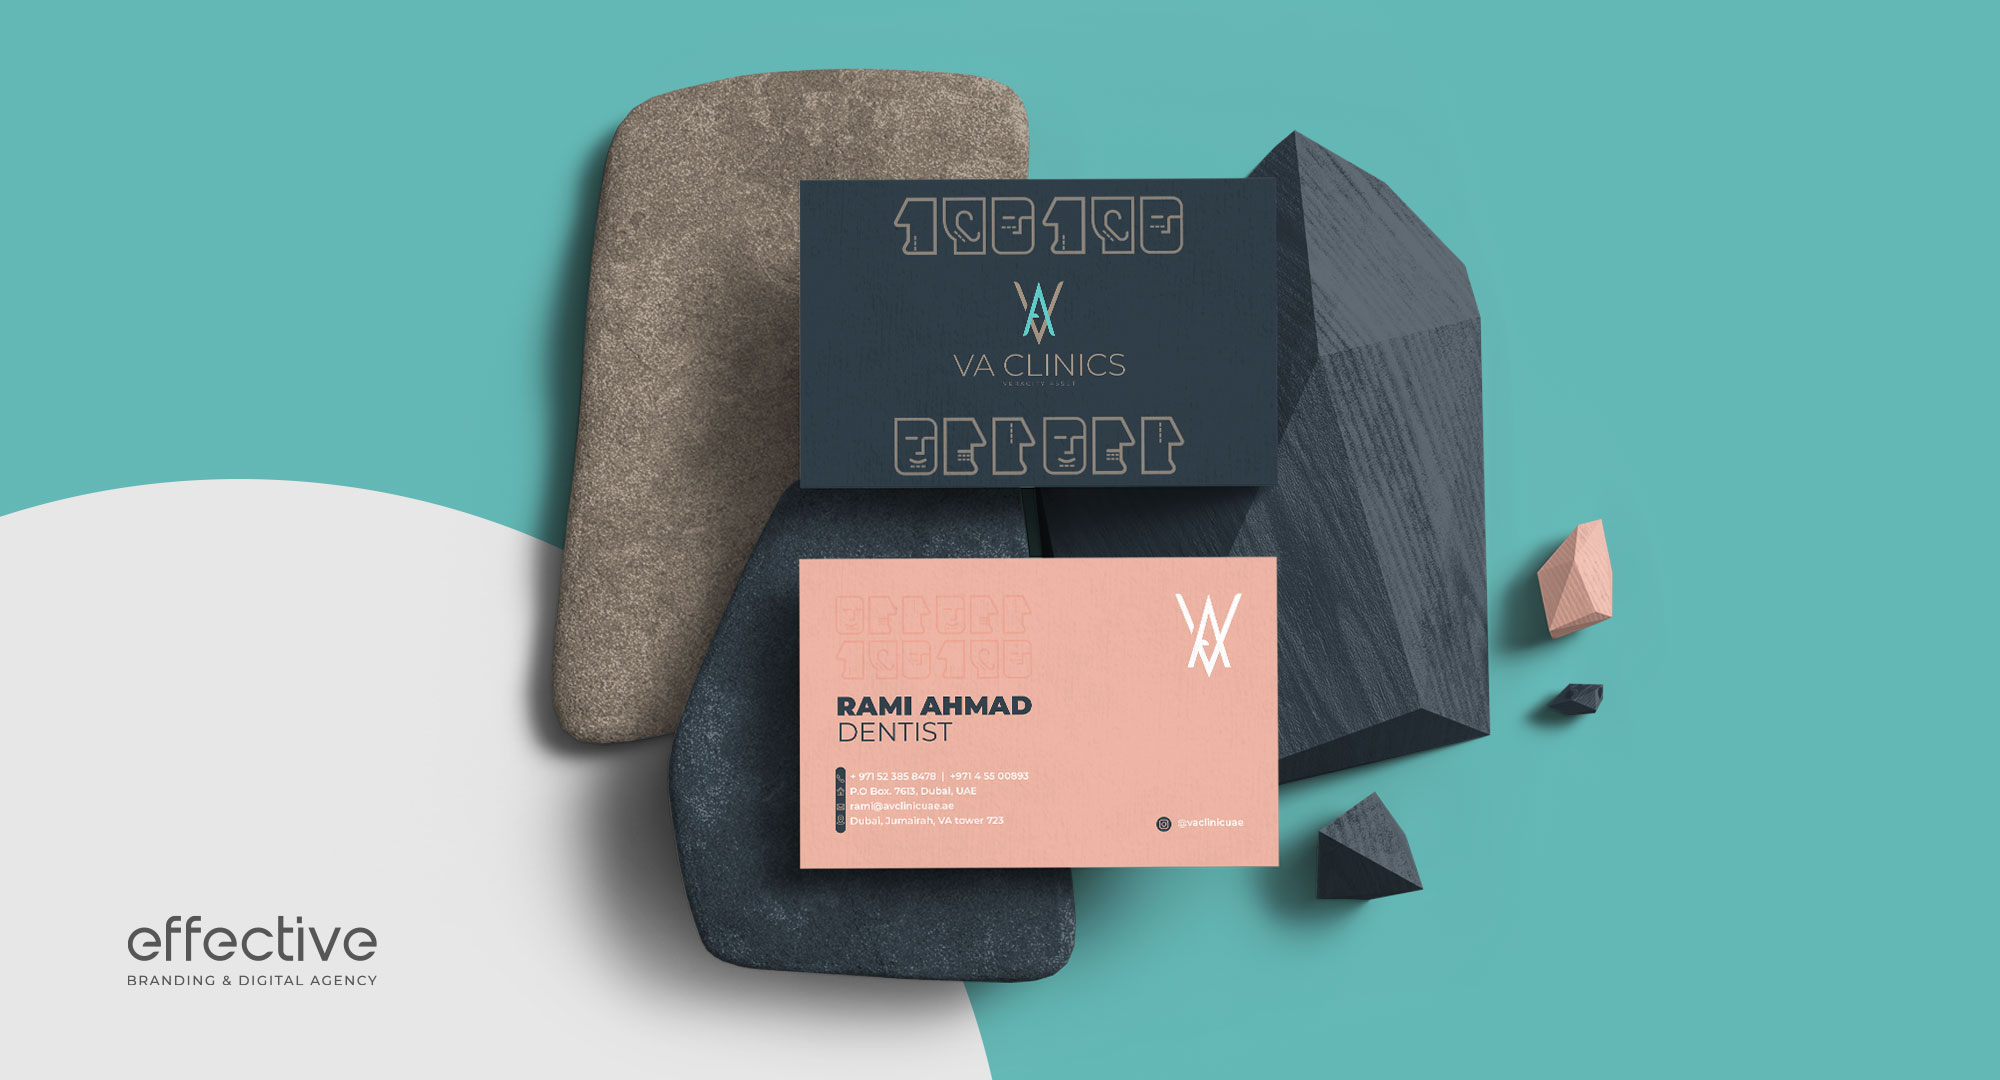 Design That Stands Out: Unique Business Card Solutions